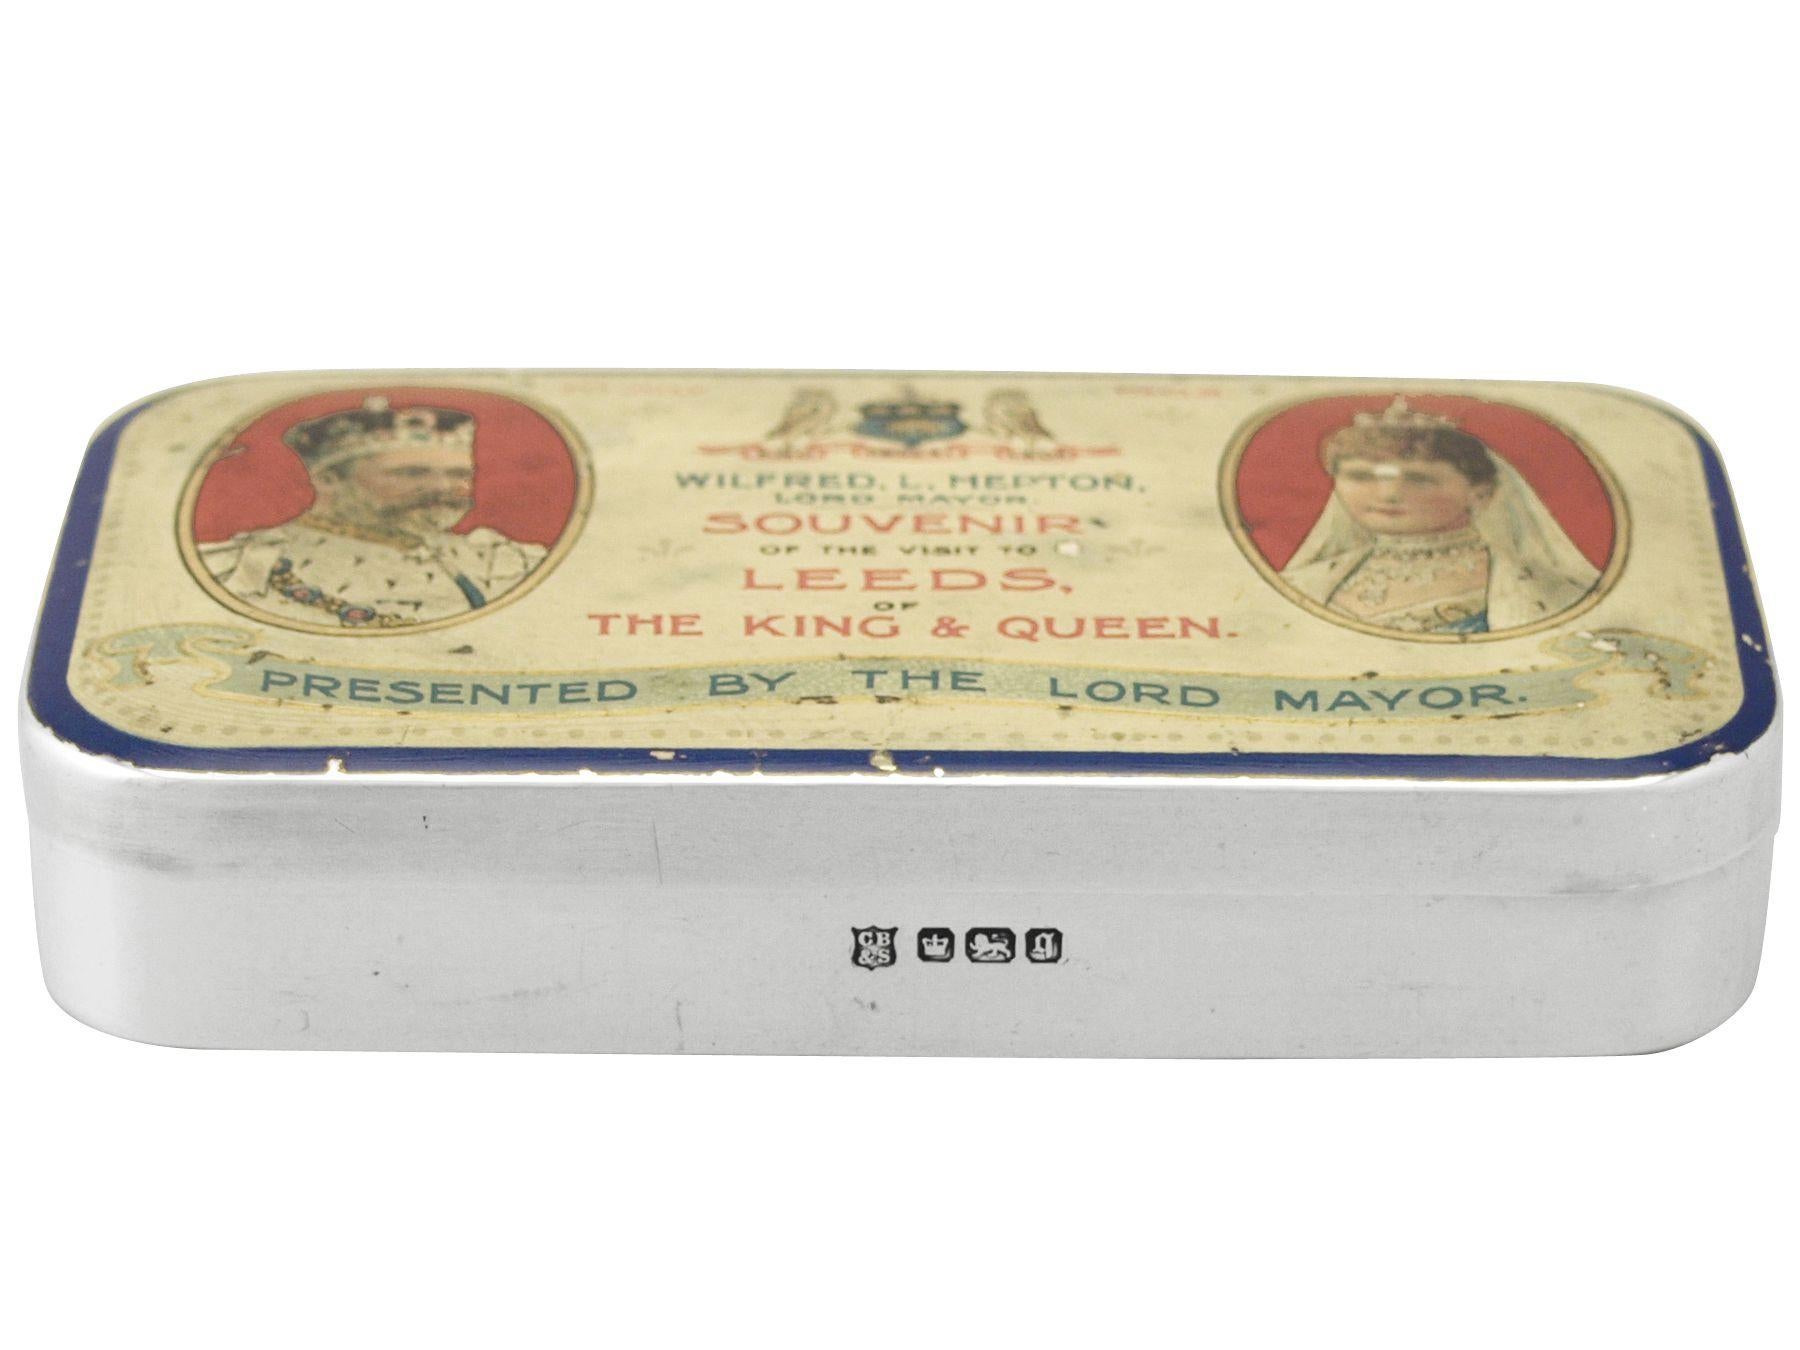 A fine and impressive, unusual antique Edwardian English sterling silver commemorative box; an addition to the ornamental silverware collection.

This fine antique Edwardian sterling silver commemorative box has a plain rectangular form with rounded